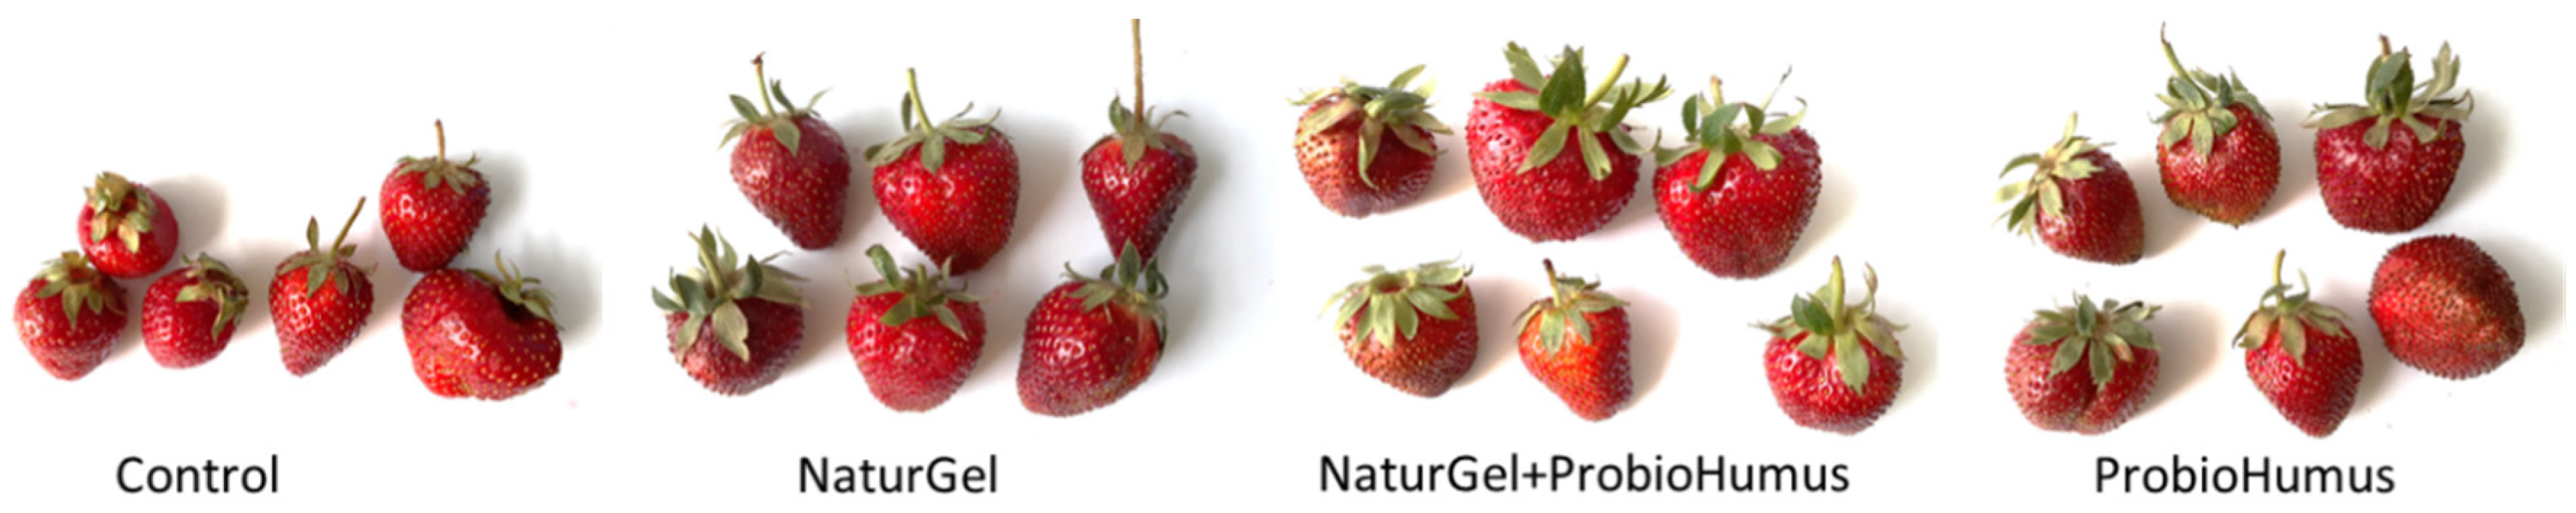 Plants | Free Full-Text | Effects Induced by the Agricultural Application  of Probiotics on Antioxidant Potential of Strawberries | HTML